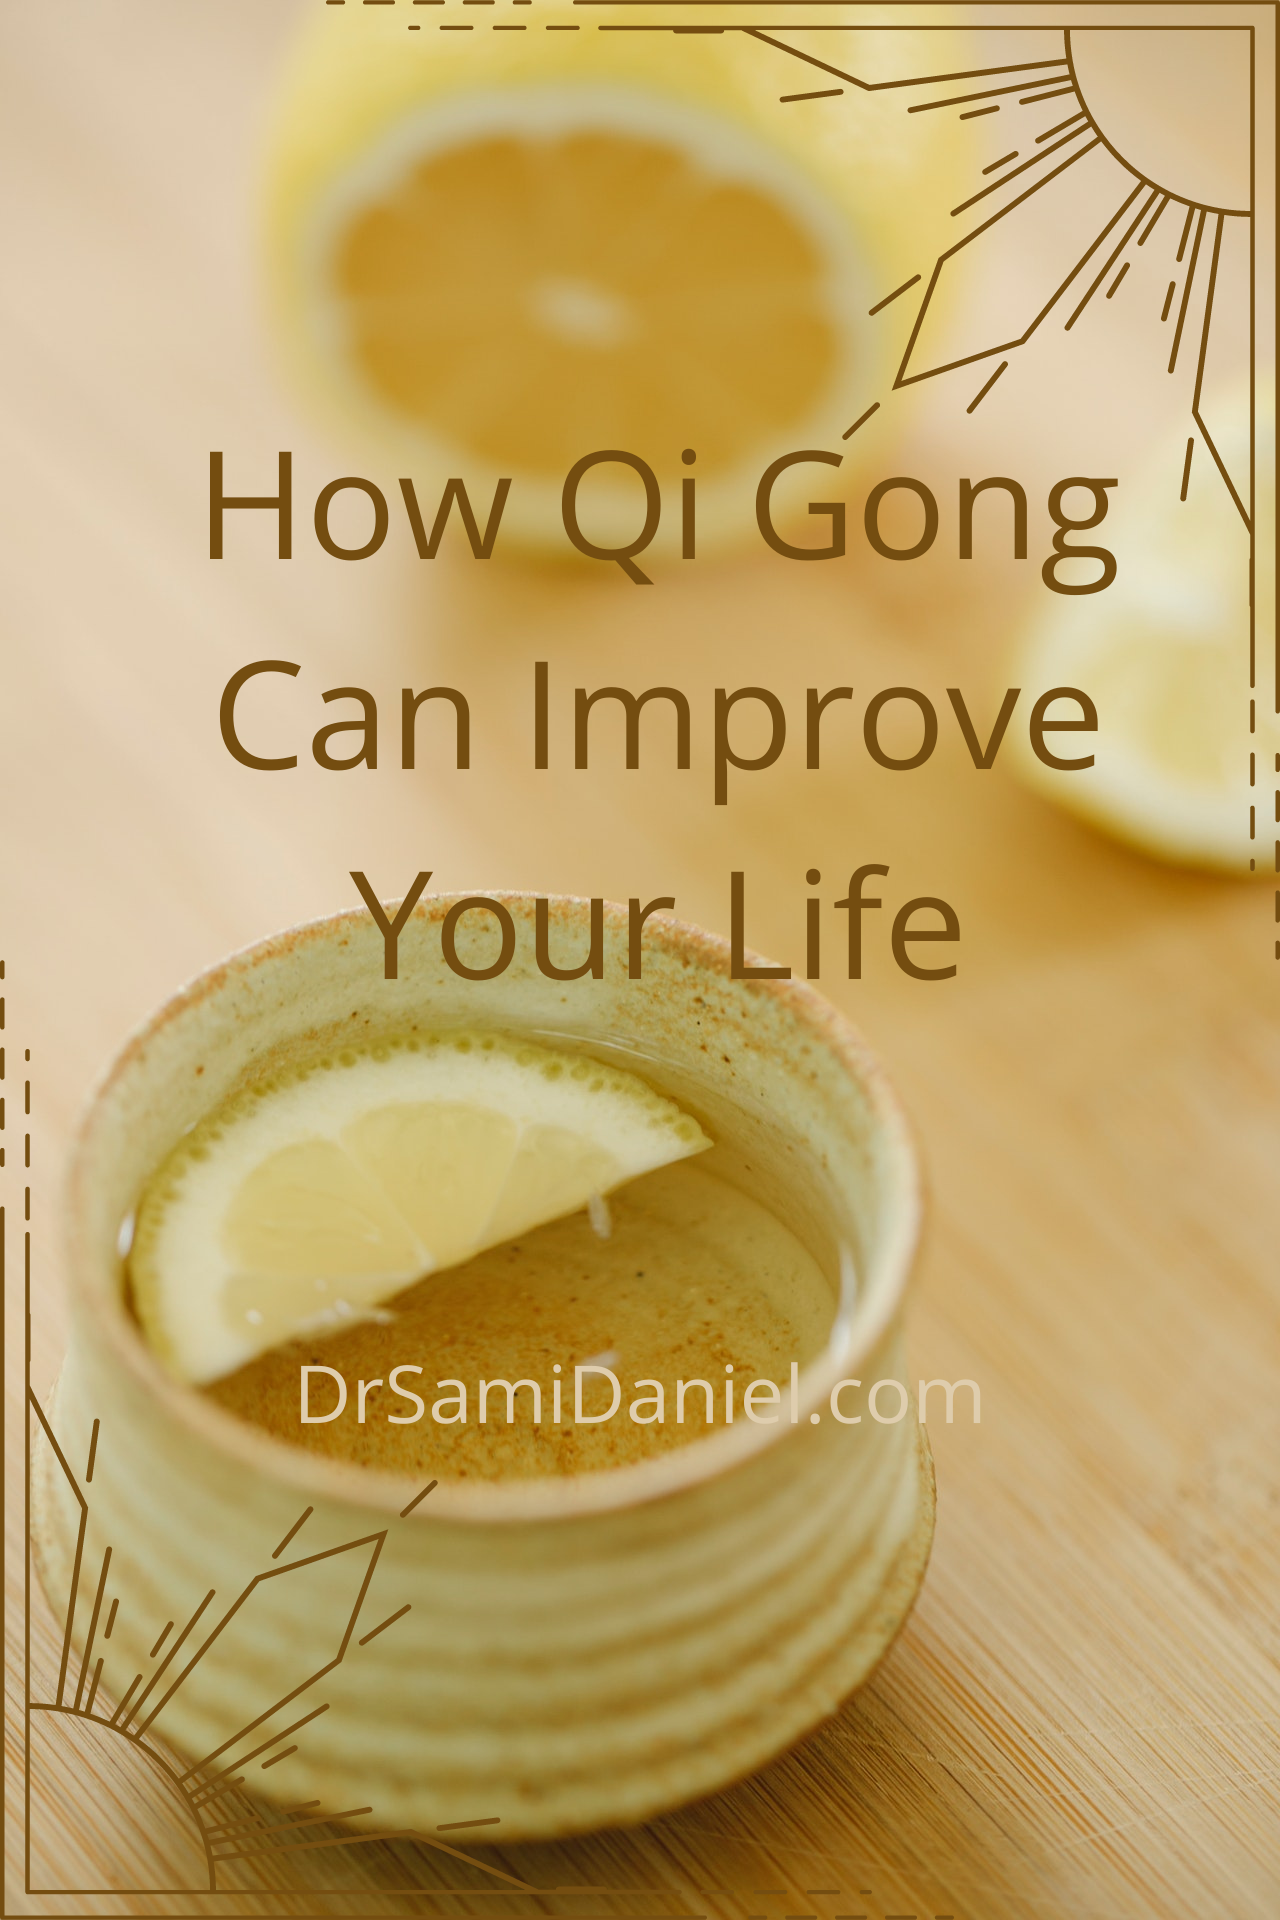 How Qi Gong can Improve Your Life